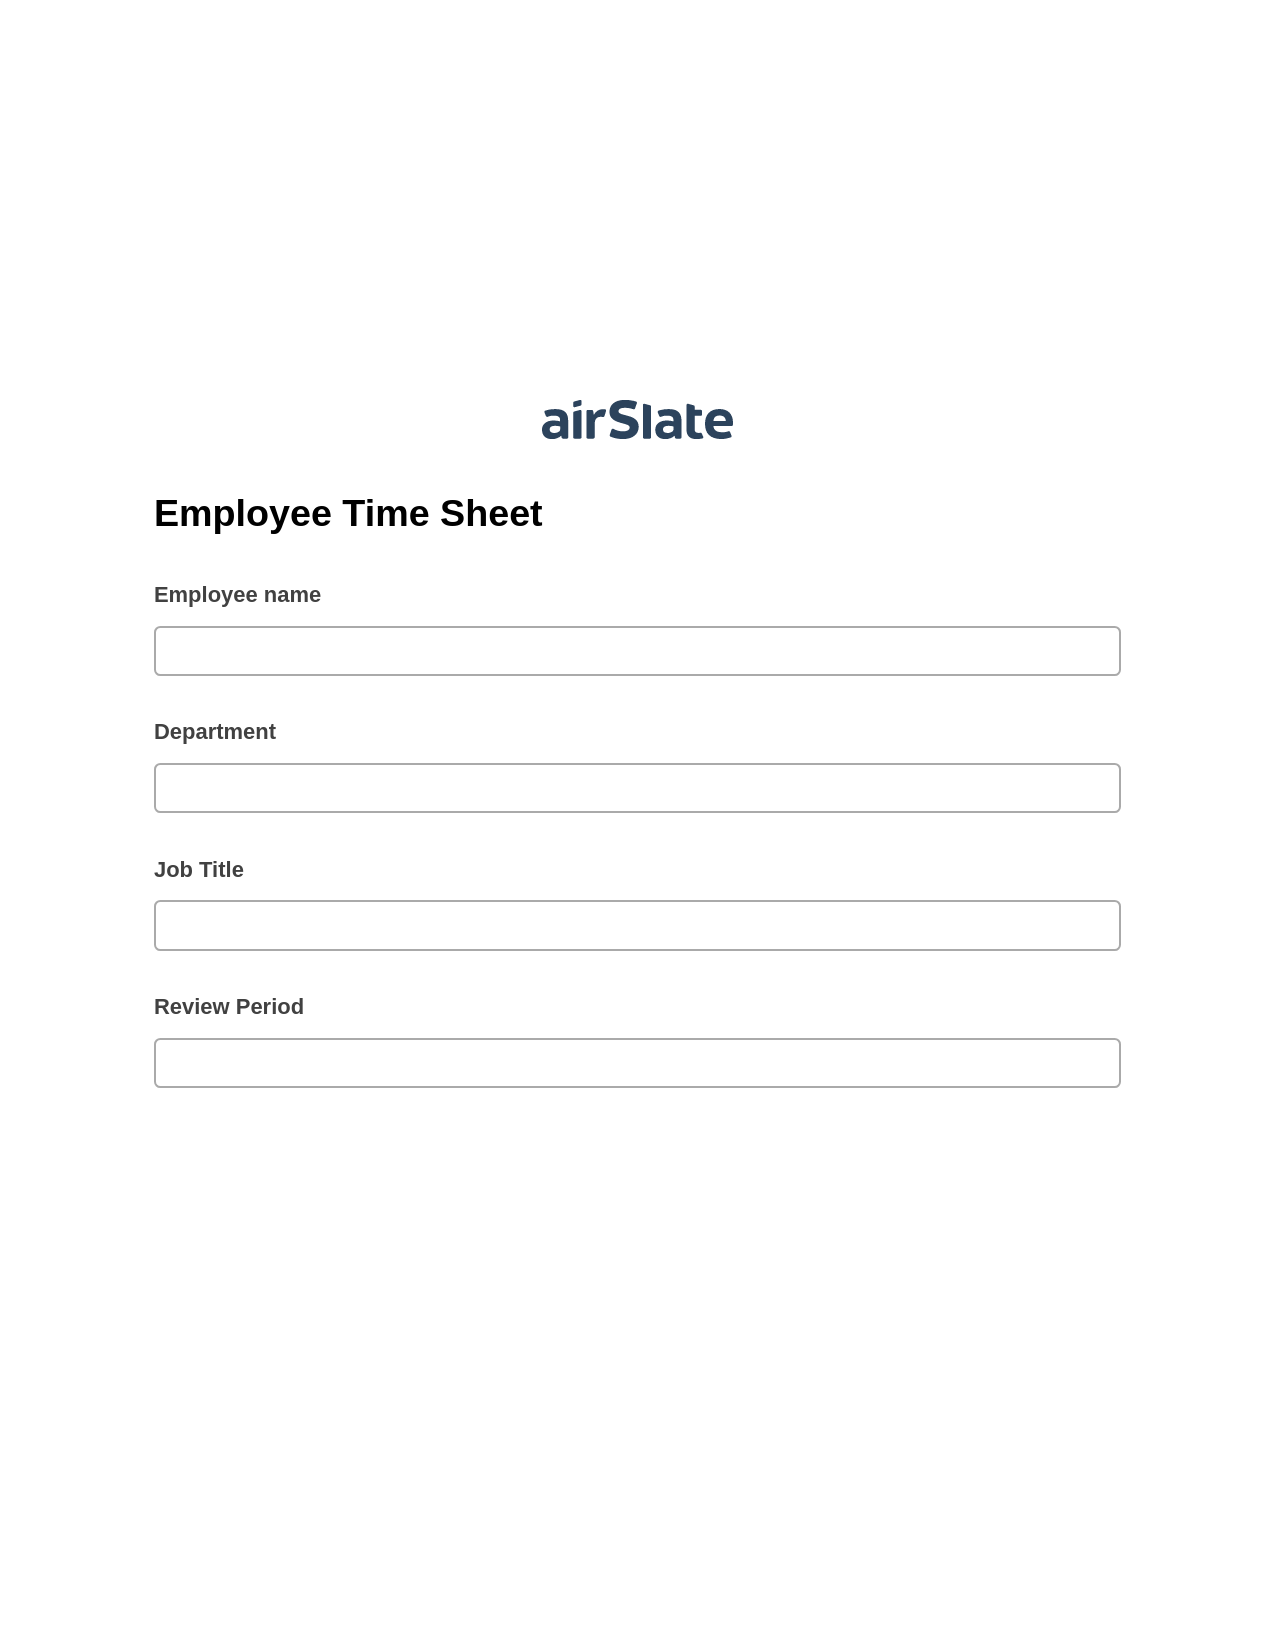 Employee Time Sheet Pre-fill from Excel Spreadsheet Bot, Create slate from another Flow Bot, Archive to SharePoint Folder Bot